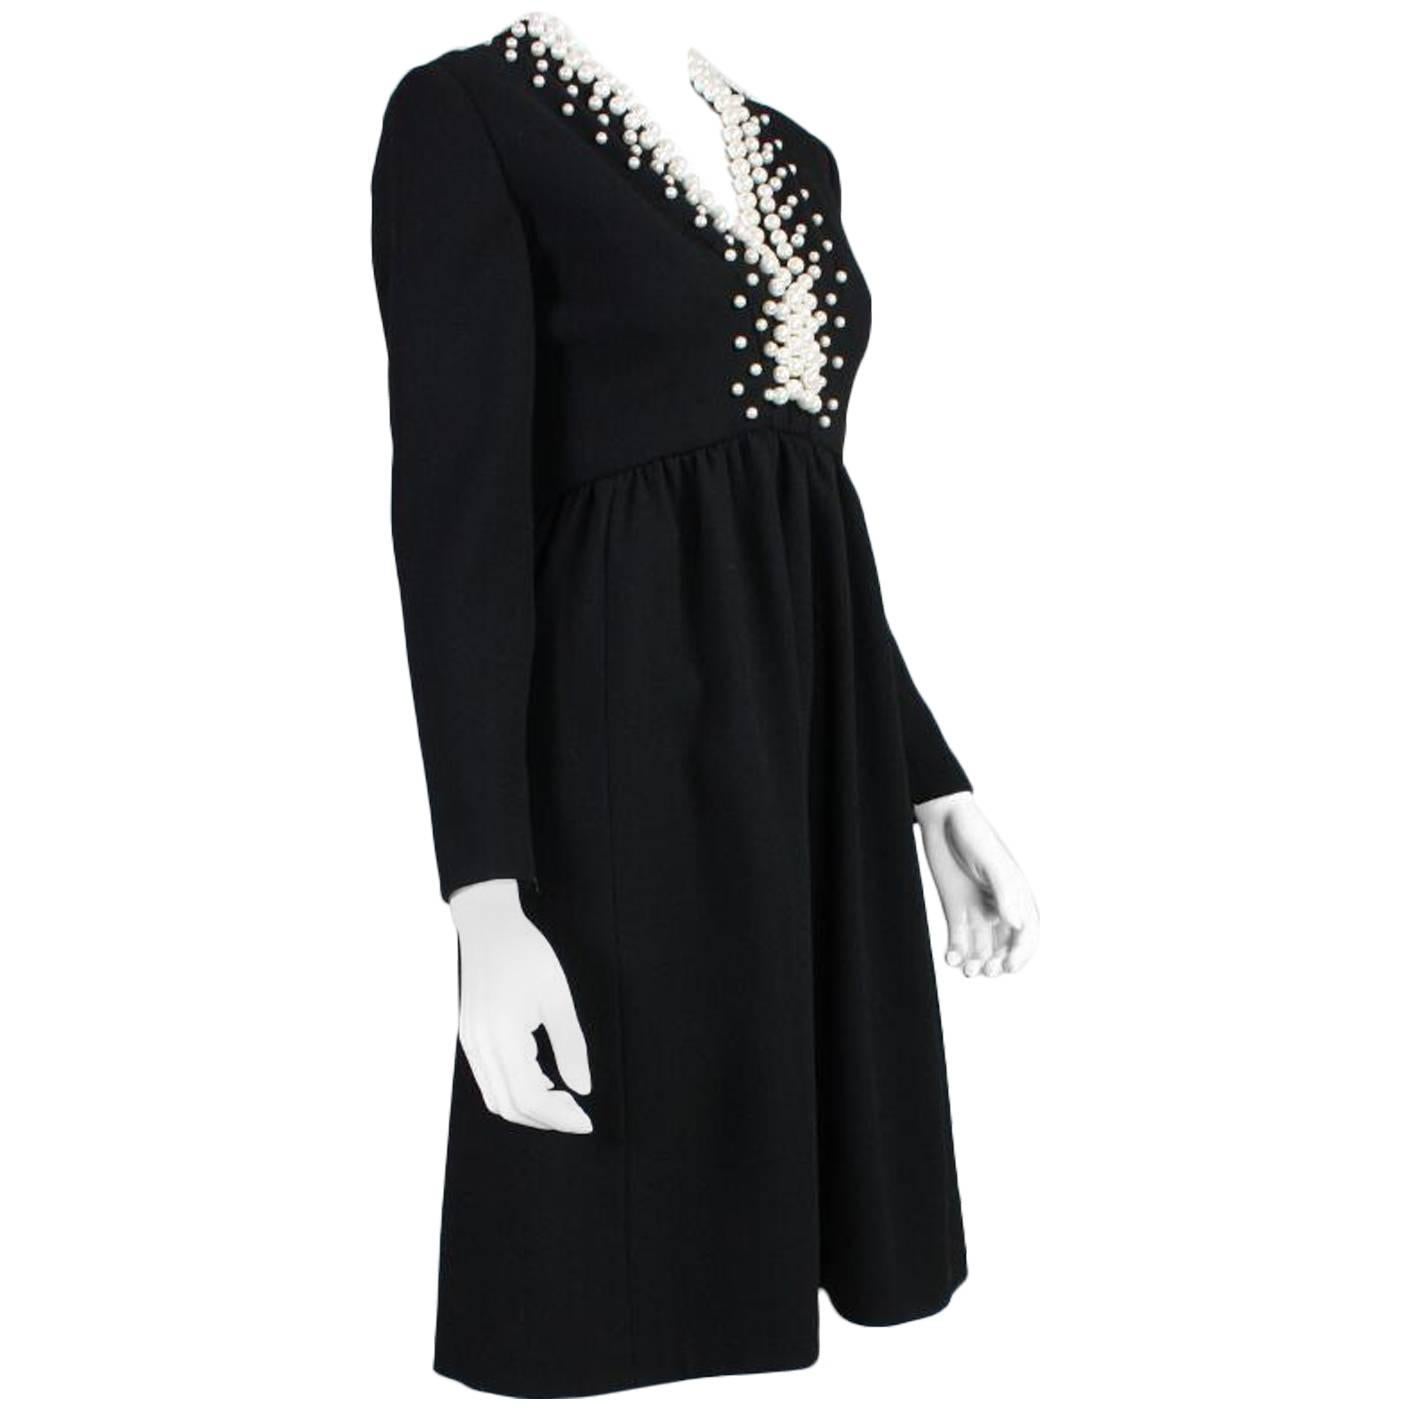 Vintage cocktail dress from Donald Brooks dates to the 1960's and is made of black wool crepe and features faux pearl detailing at the neckline and down the center back bodice.  There is gathering just under the bust in a V formation resulting in a